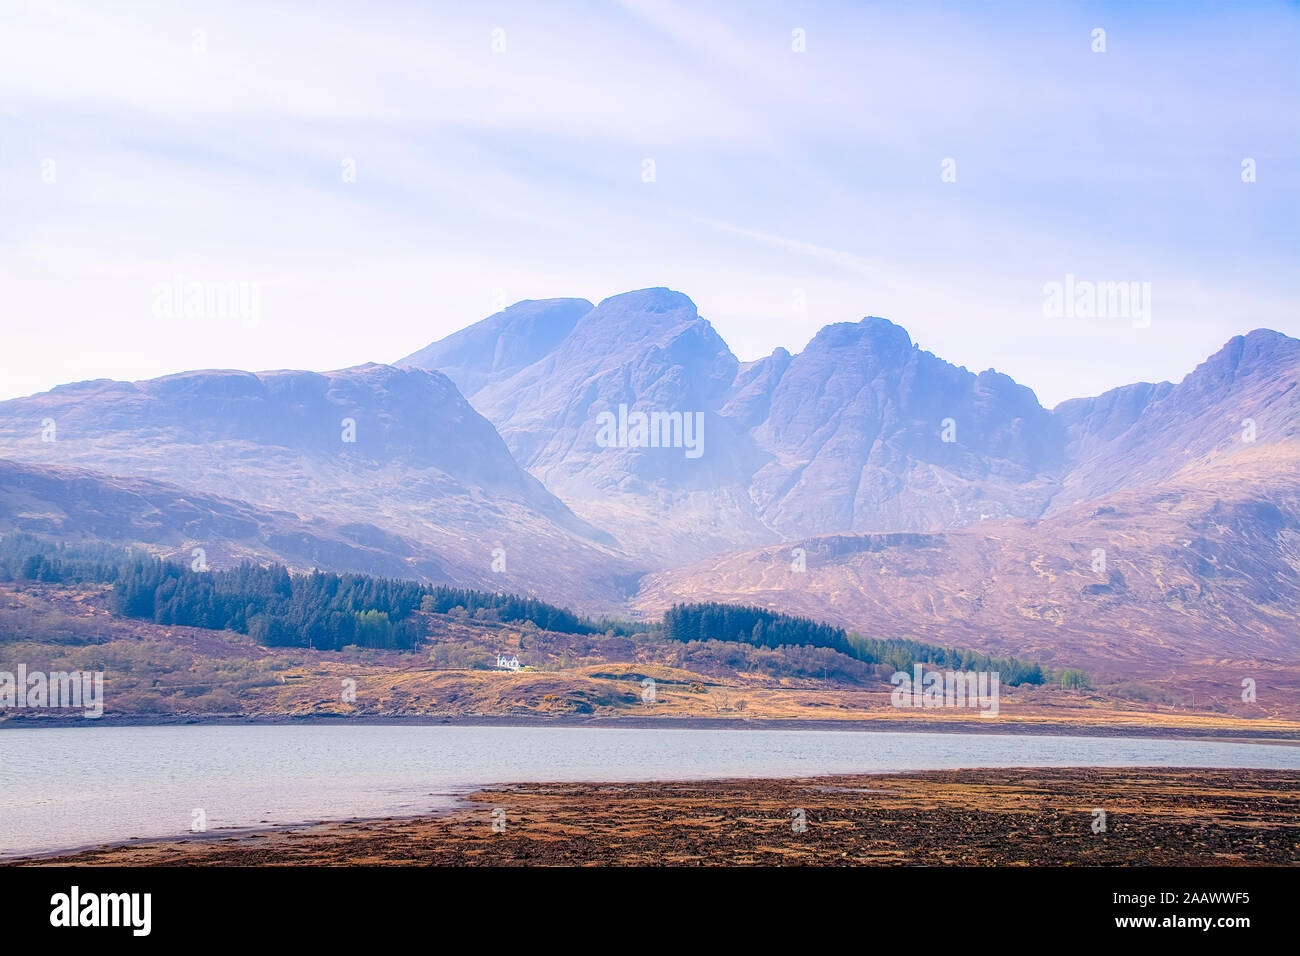 Scenic view of Cuillin mountains against sky, Isle of Skye, Highlands, Scotland, UK Stock Photo